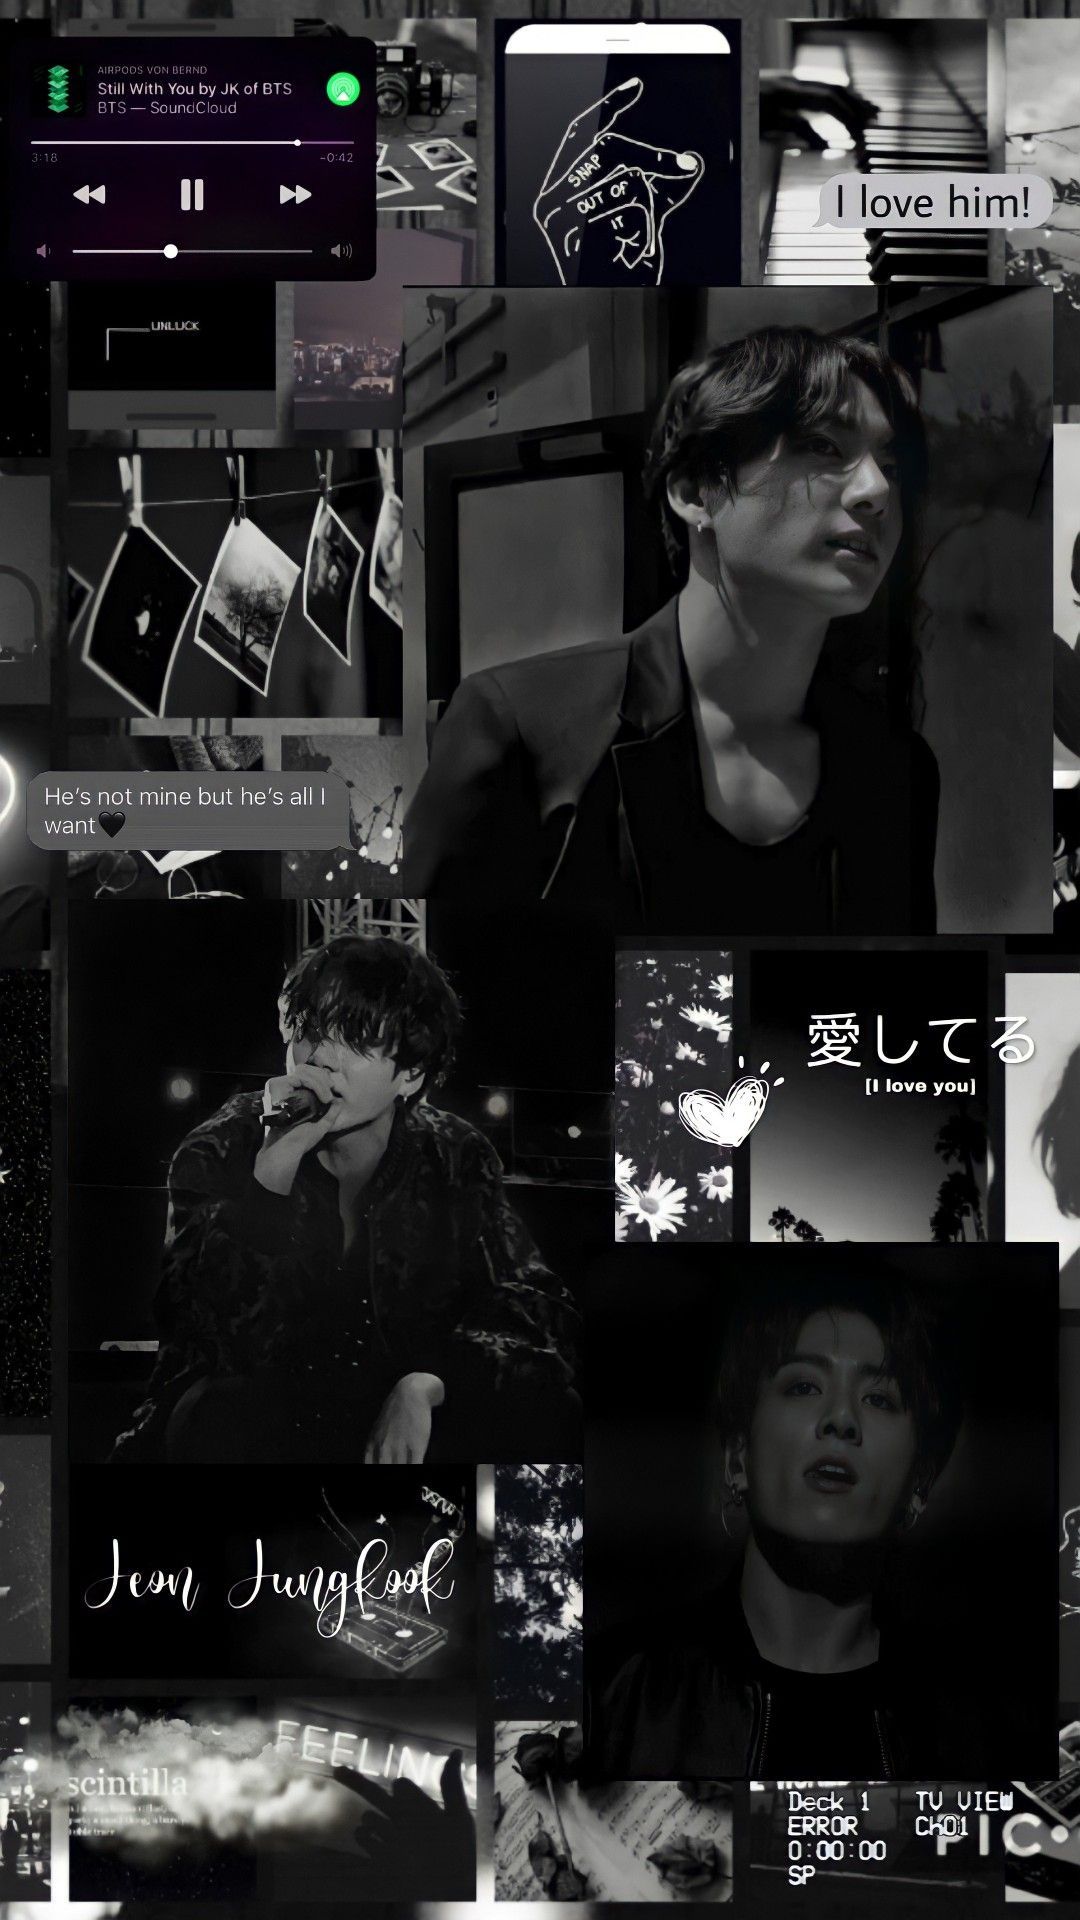 I made a black and white Jungkook wallpaper for my phone - Jungkook